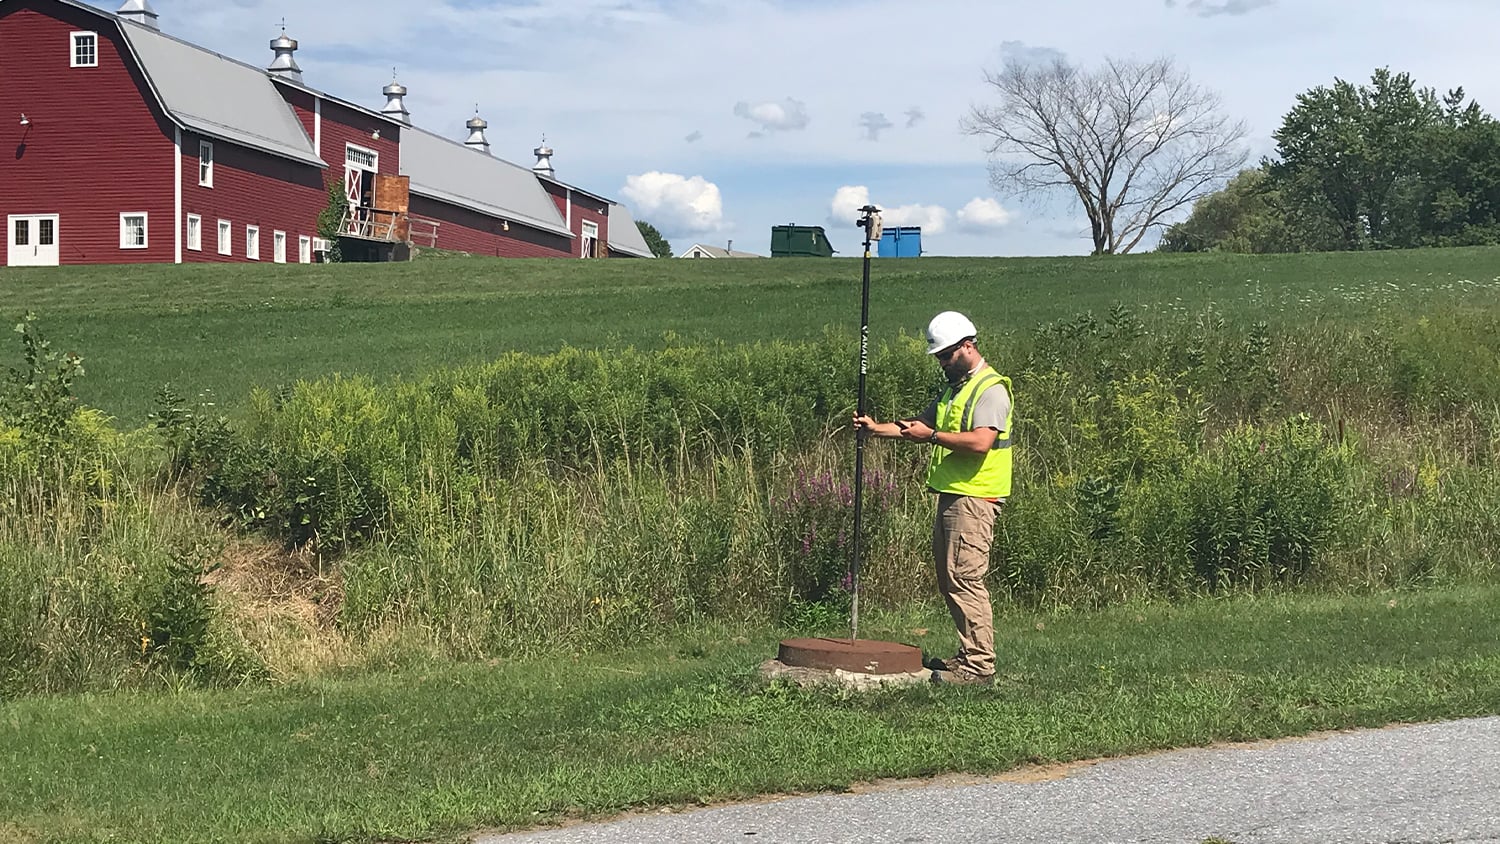 Vermont Gas Doubles Efficiency in the Field Using Eos Arrow Gold GNSS Receivers